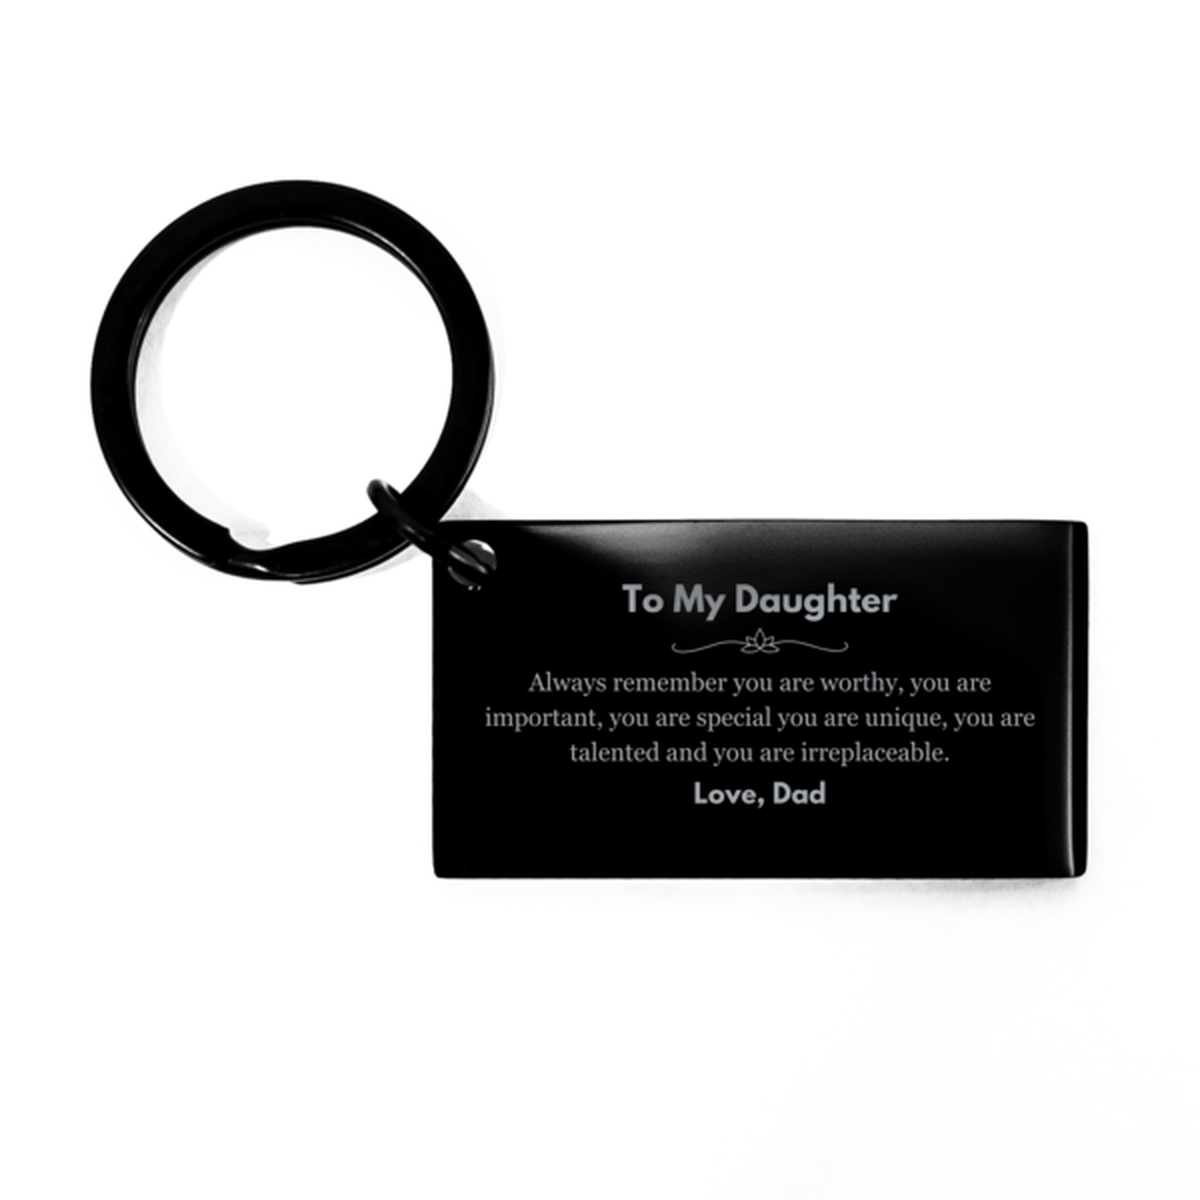 Daughter Birthday Gifts from Dad, Inspirational Keychain for Daughter Christmas Graduation Gifts for Daughter Always remember you are worthy, you are important. Love, Dad